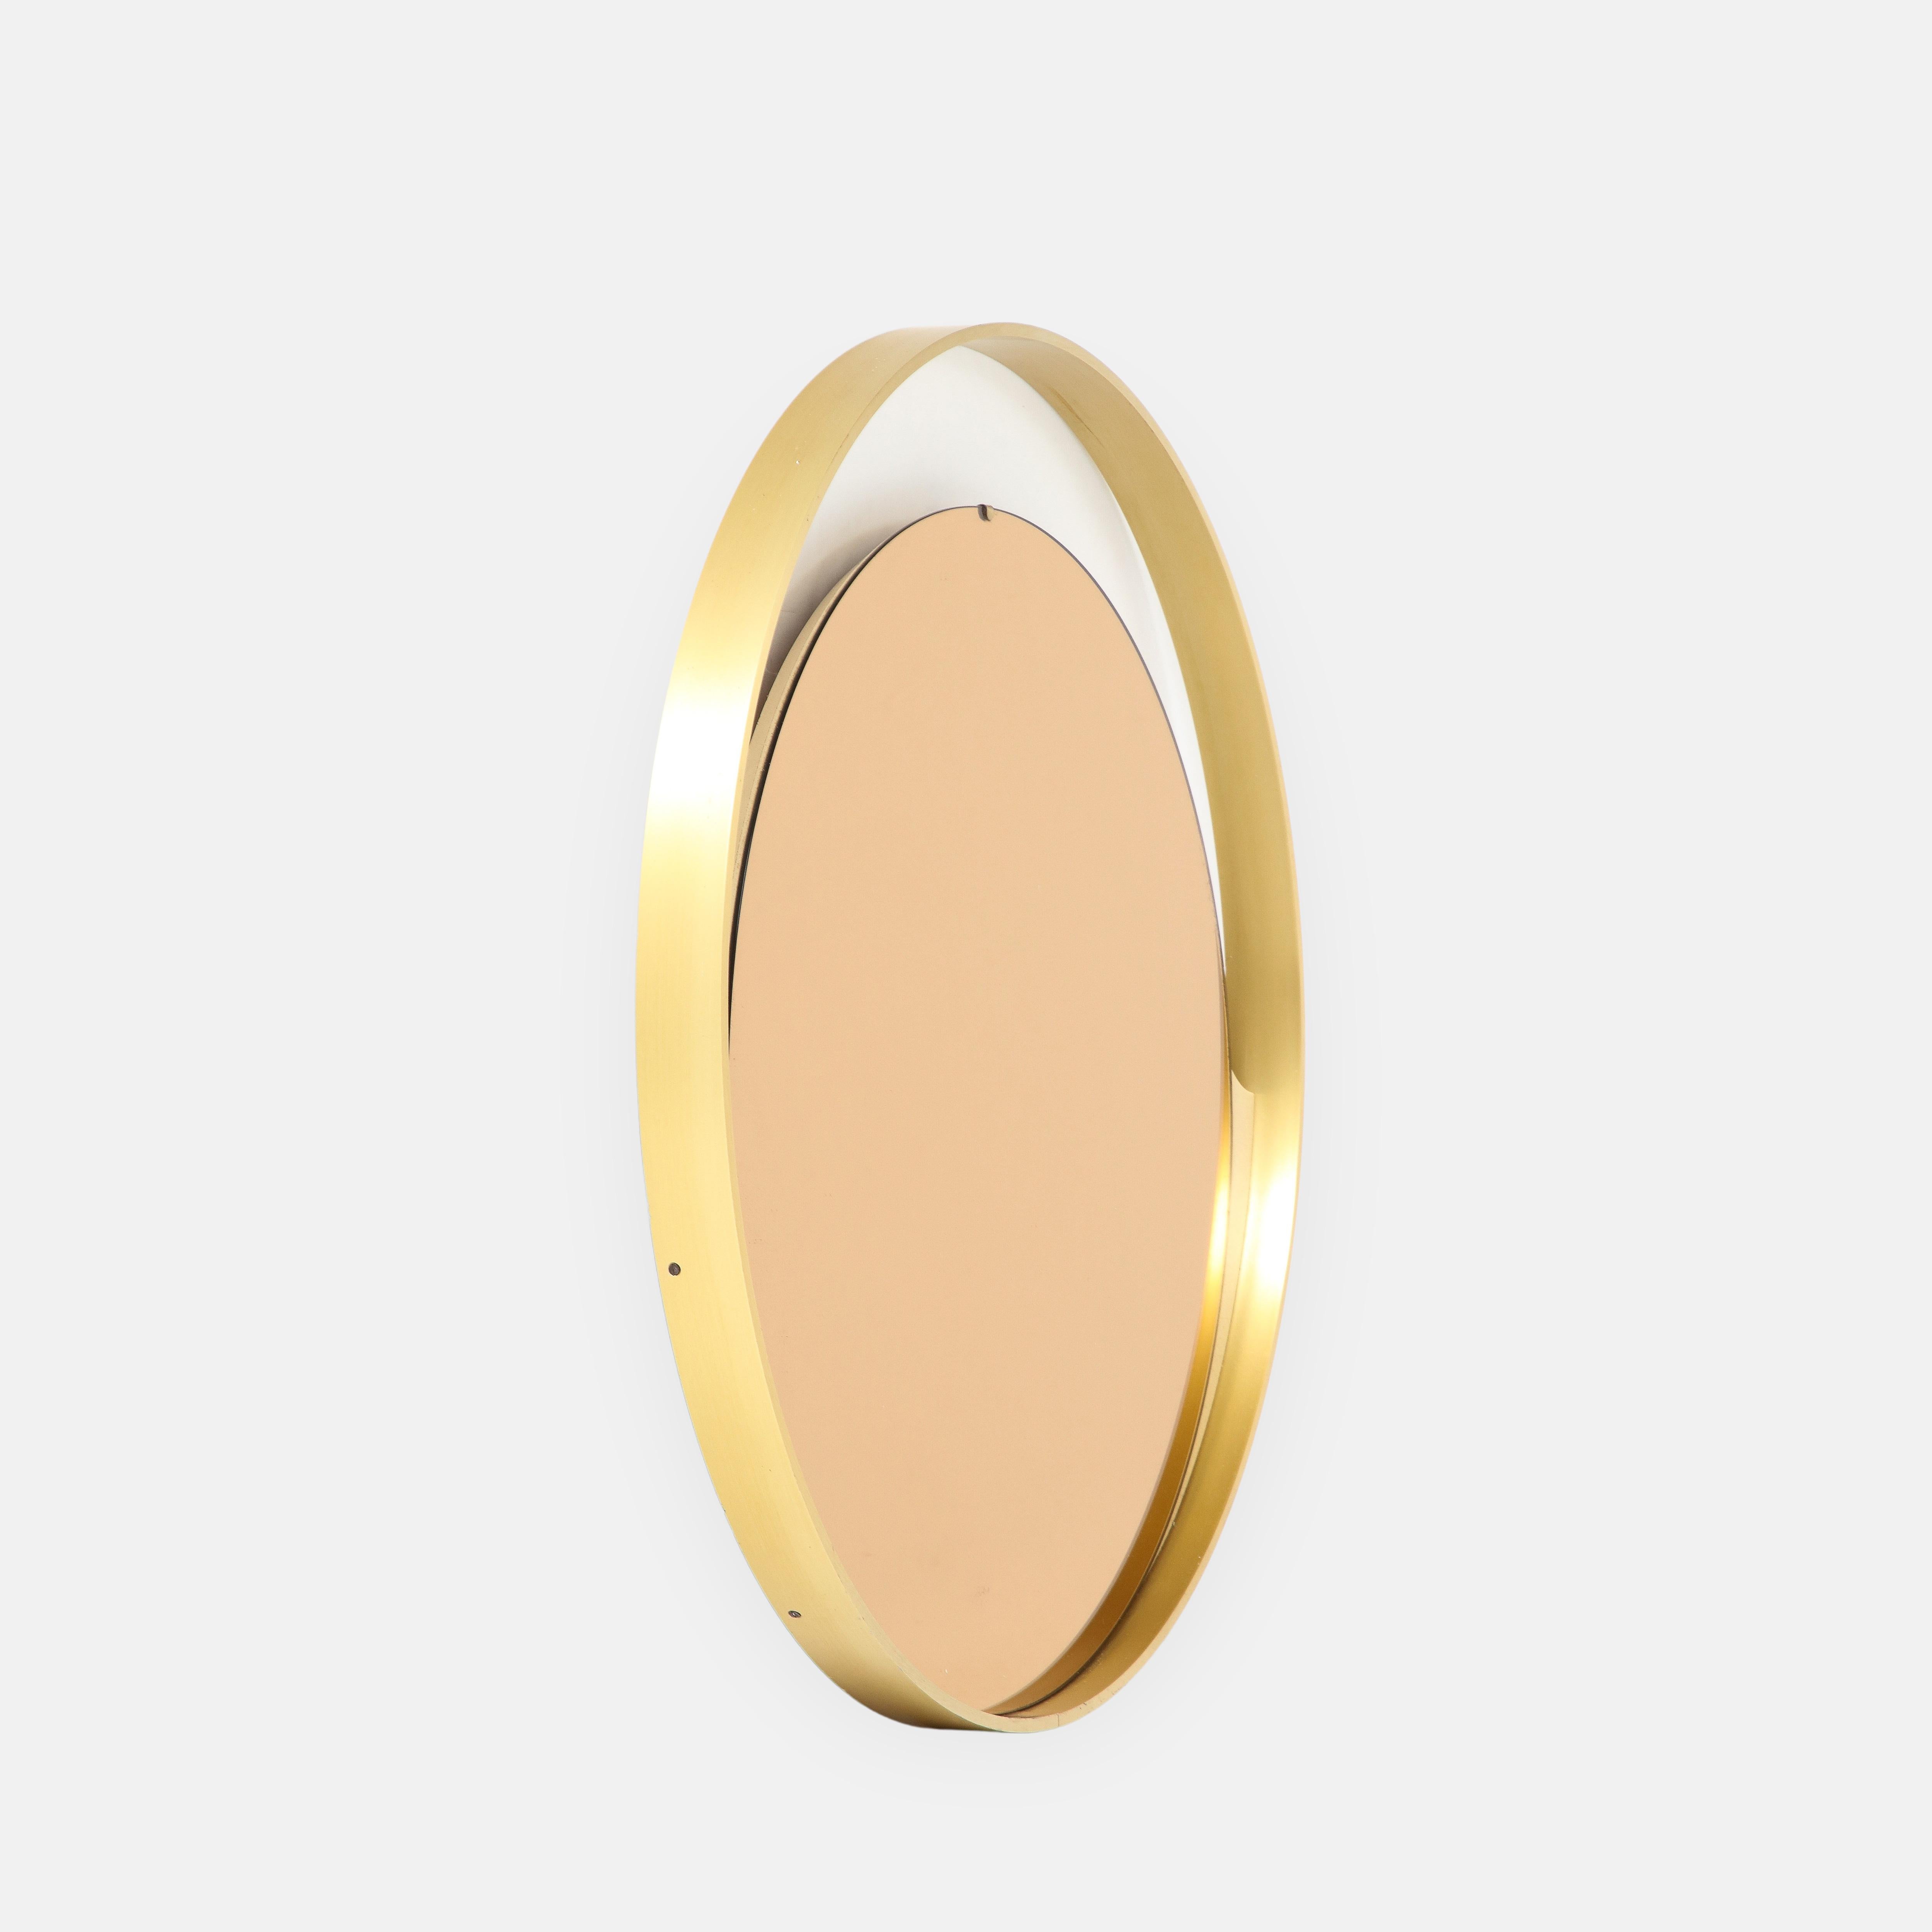 1970s Italian Modernist Brass and Rose Gold Round Mirror In Good Condition For Sale In New York, NY